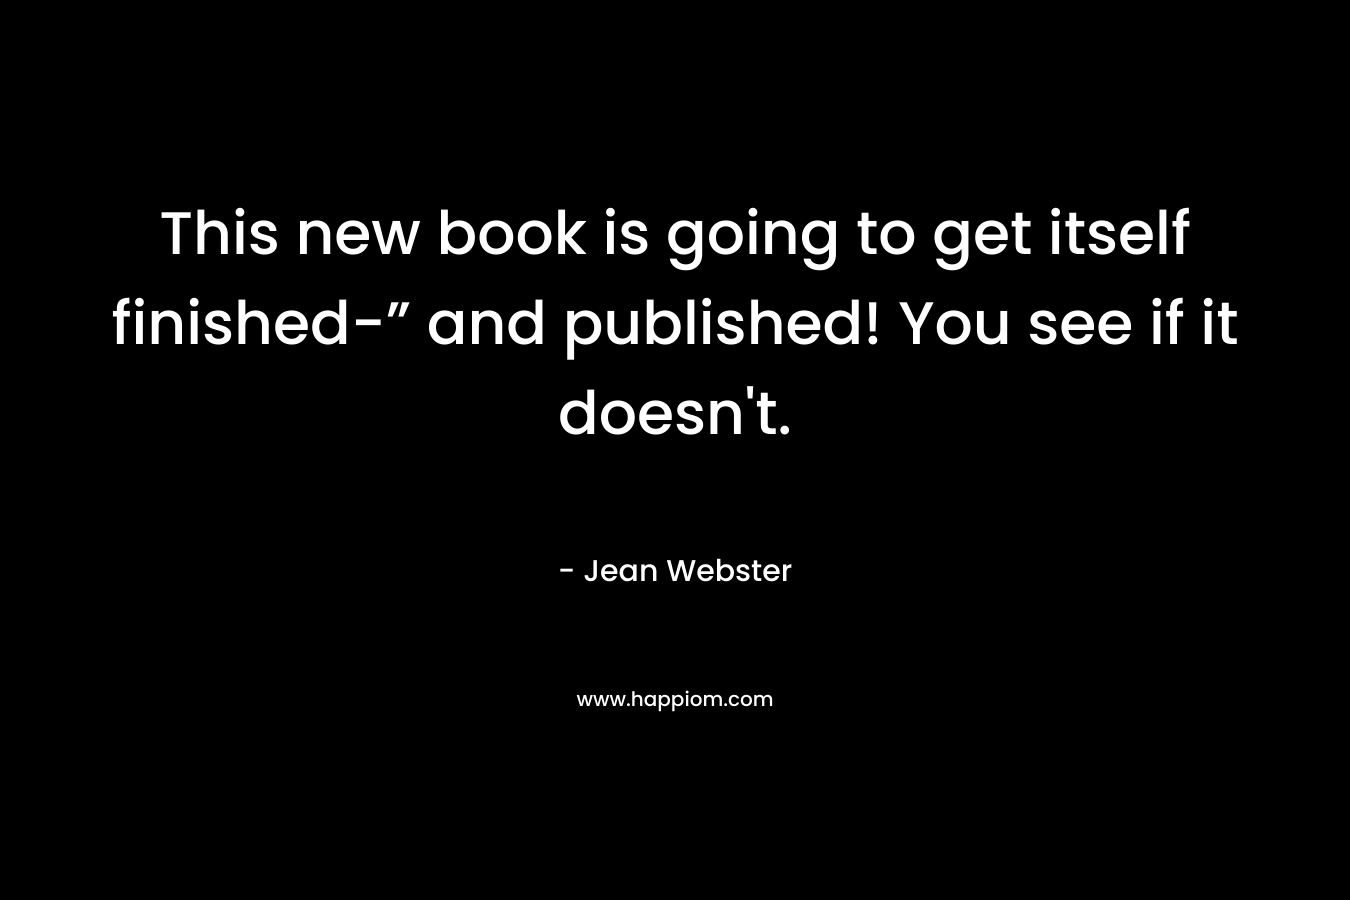 This new book is going to get itself finished-” and published! You see if it doesn’t. – Jean Webster